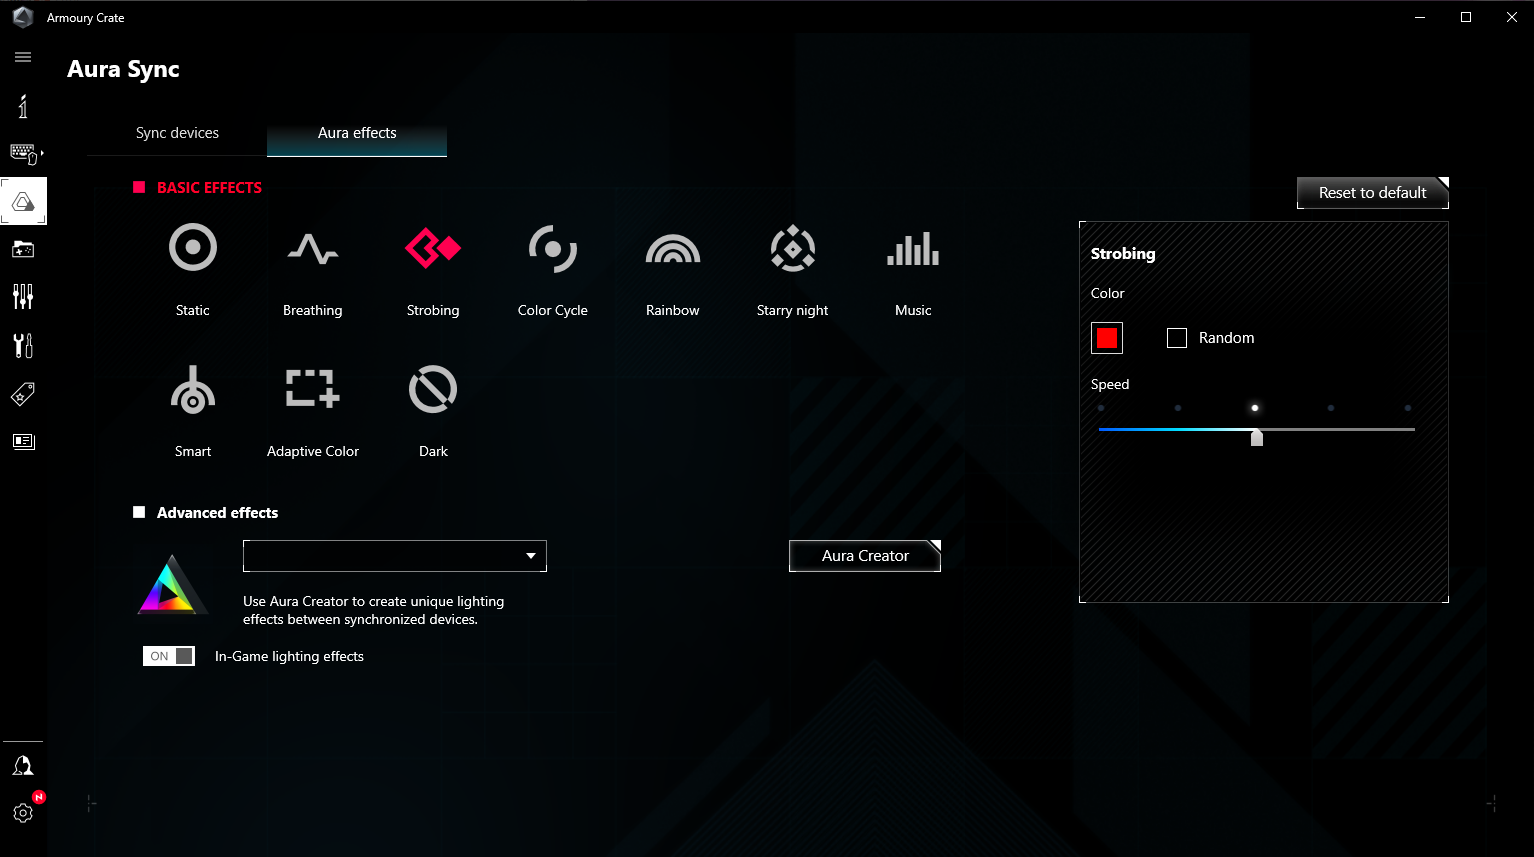 The user interface of ASUS Armoury Crate